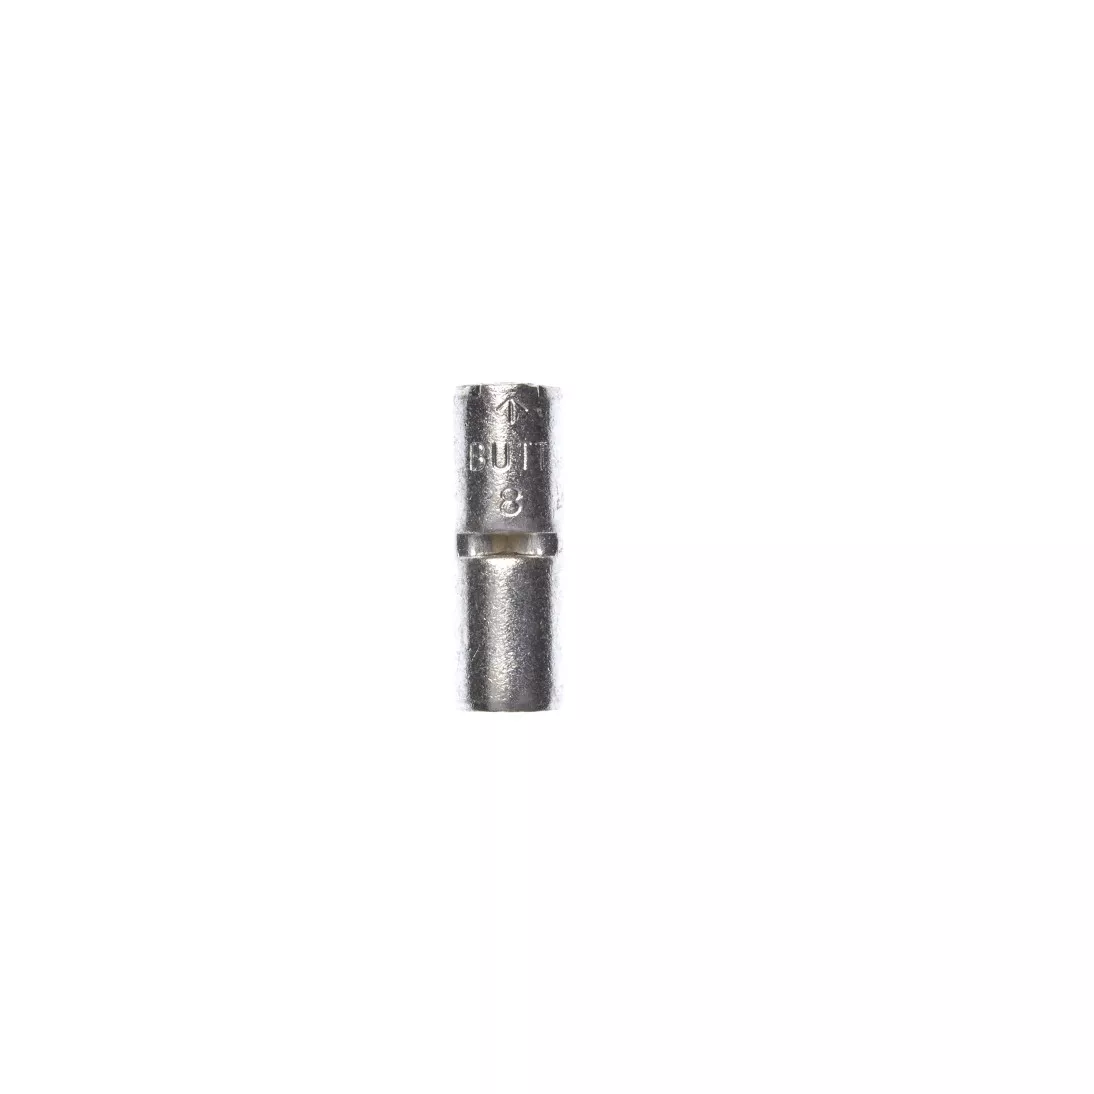 3M™ Scotchlok™ Butt Connector, Non-Insulated Brazed Seam M8BCK, 8 AWG,
built-in wire stop for correct positioning, 200/Case